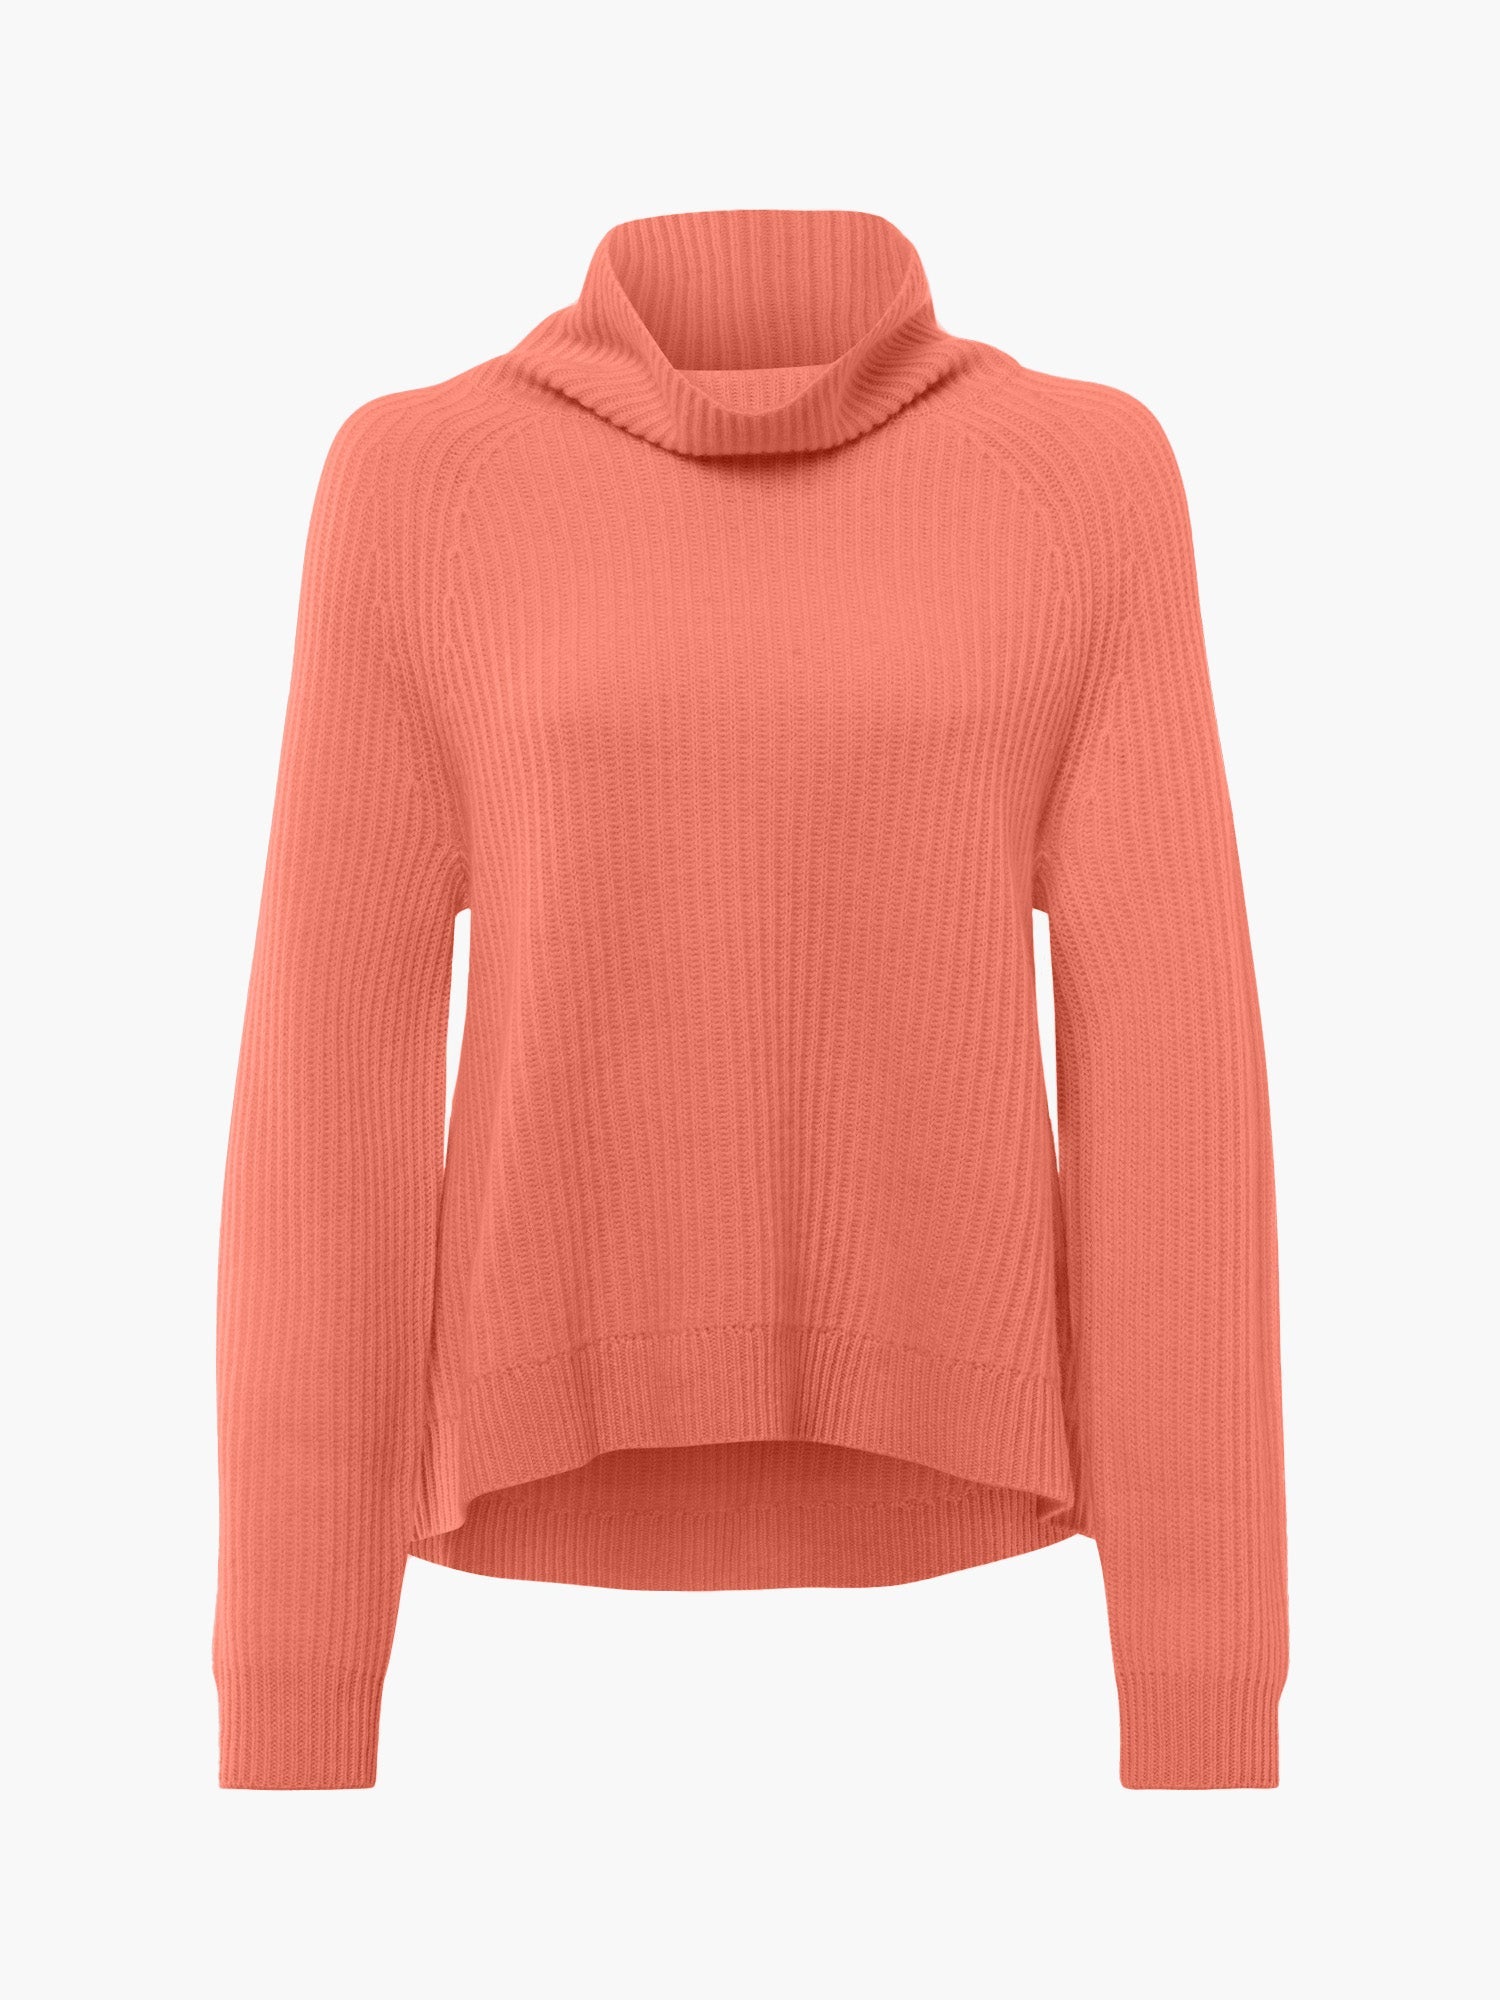 FTC-Cashmere-OUTLET-SALE-Pullover-Highneck-Strick-ARCHIVE-COLLECTION_0792f245-2e5d-4548-8661-fa1eac64147a.jpg